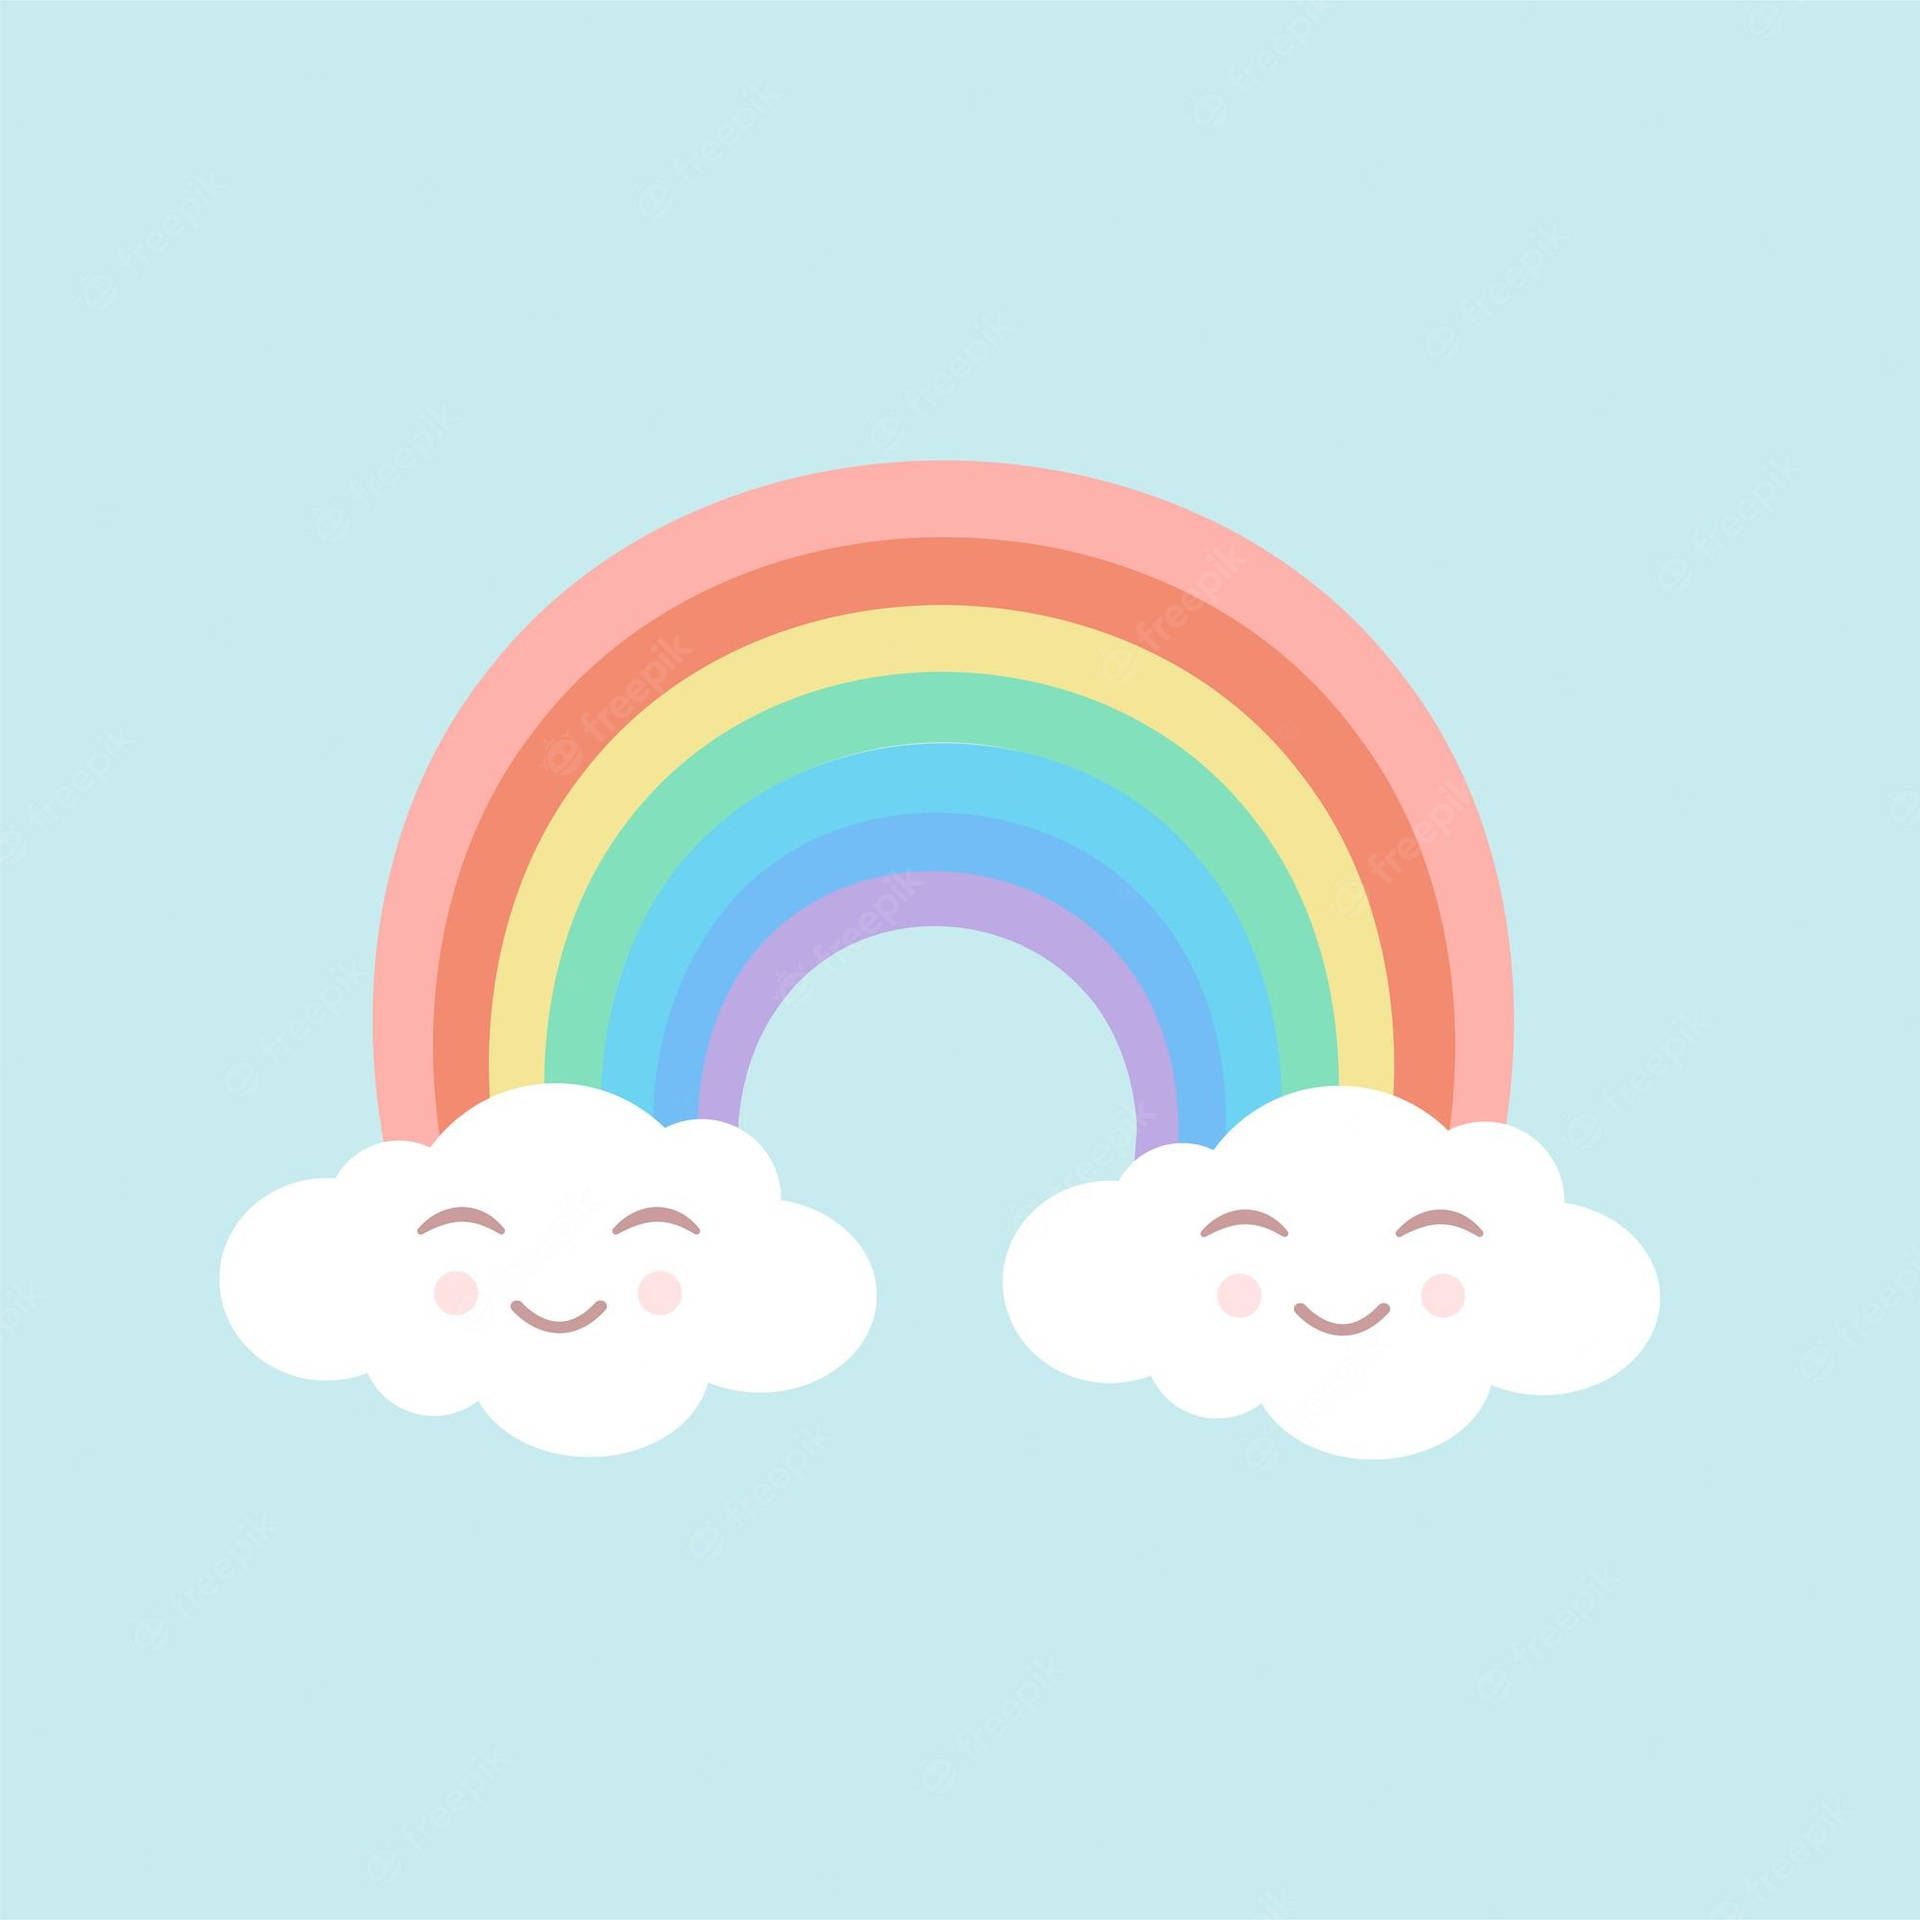 A rainbow and clouds with smiling faces - Pastel rainbow